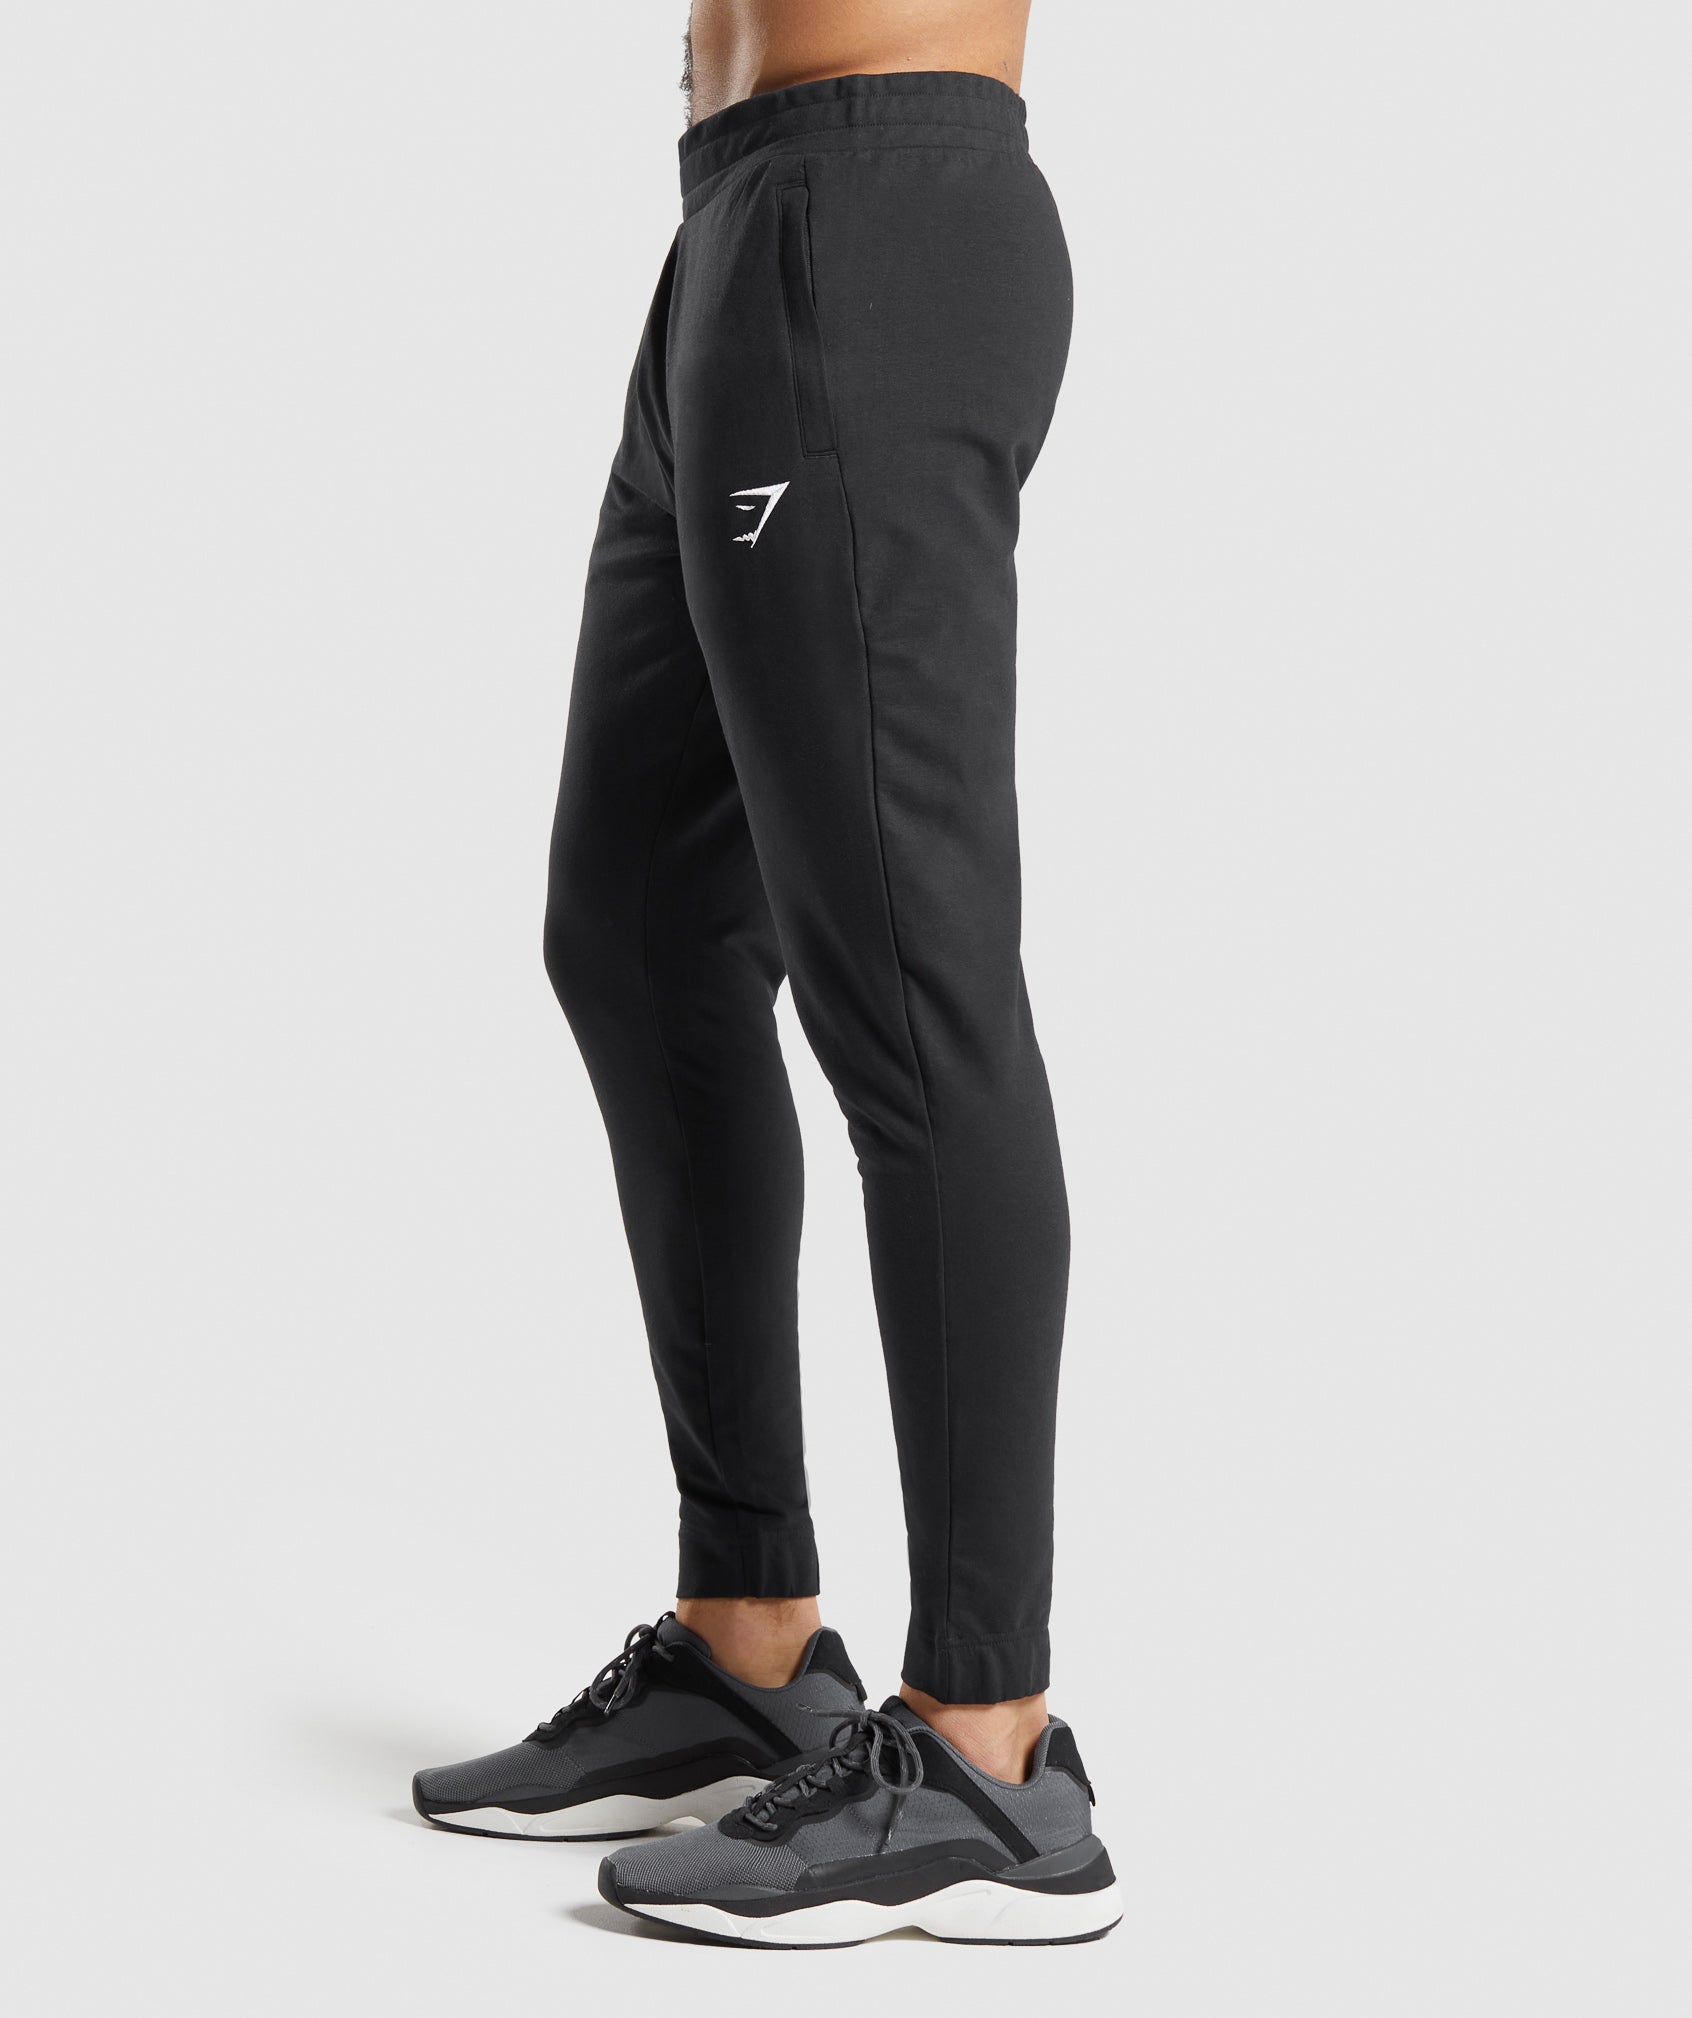 Gymshark Maxed Out Joggers - Black